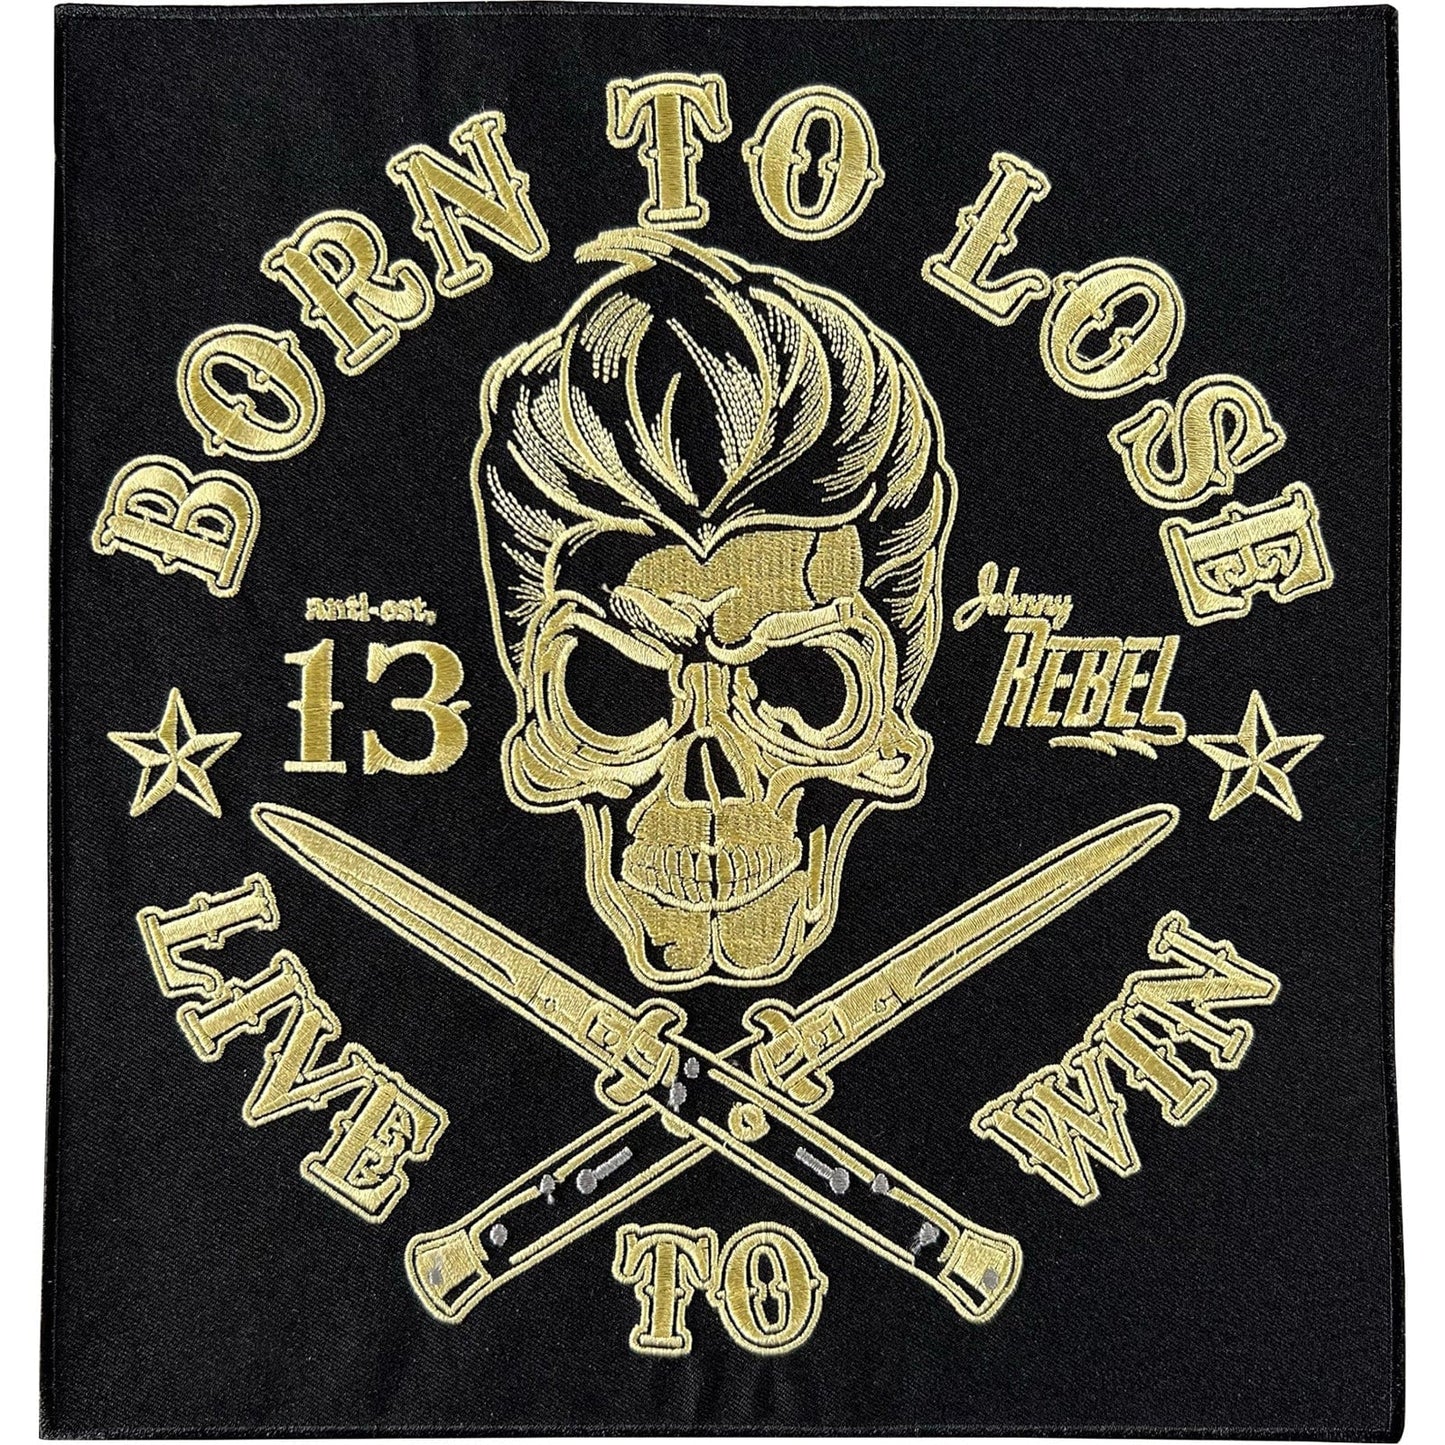 Large Born To Lose Live To Win Patch Iron On Sew On Jacket Big Embroidered Badge